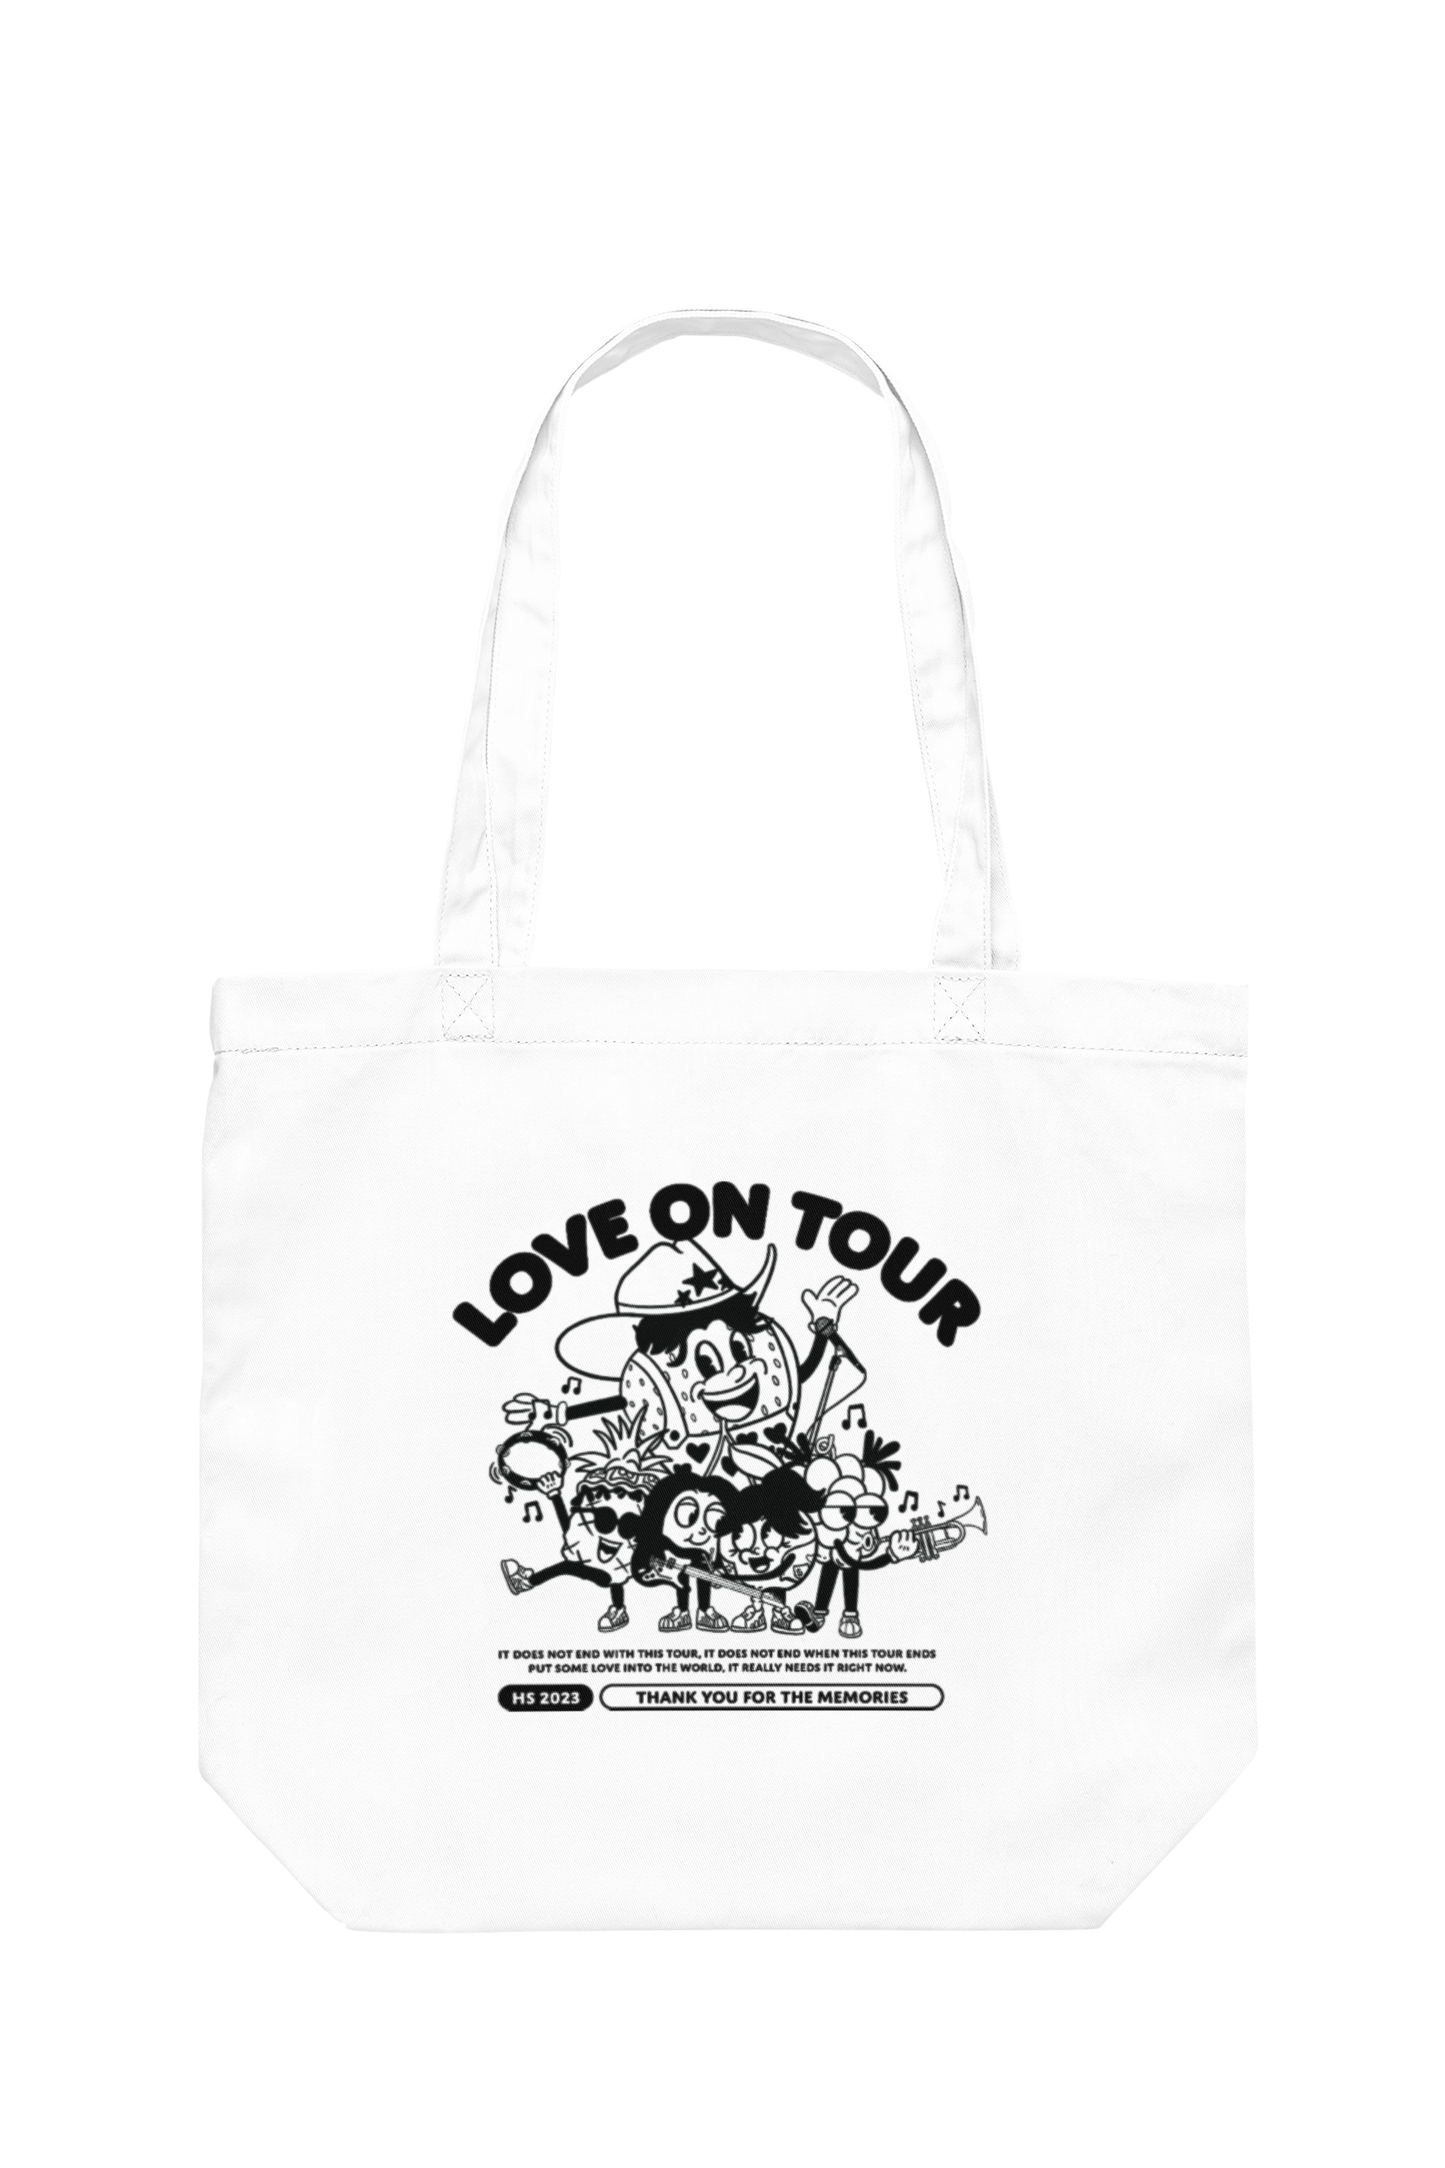 Harry Styles - Fruit On Tour Tote Bag